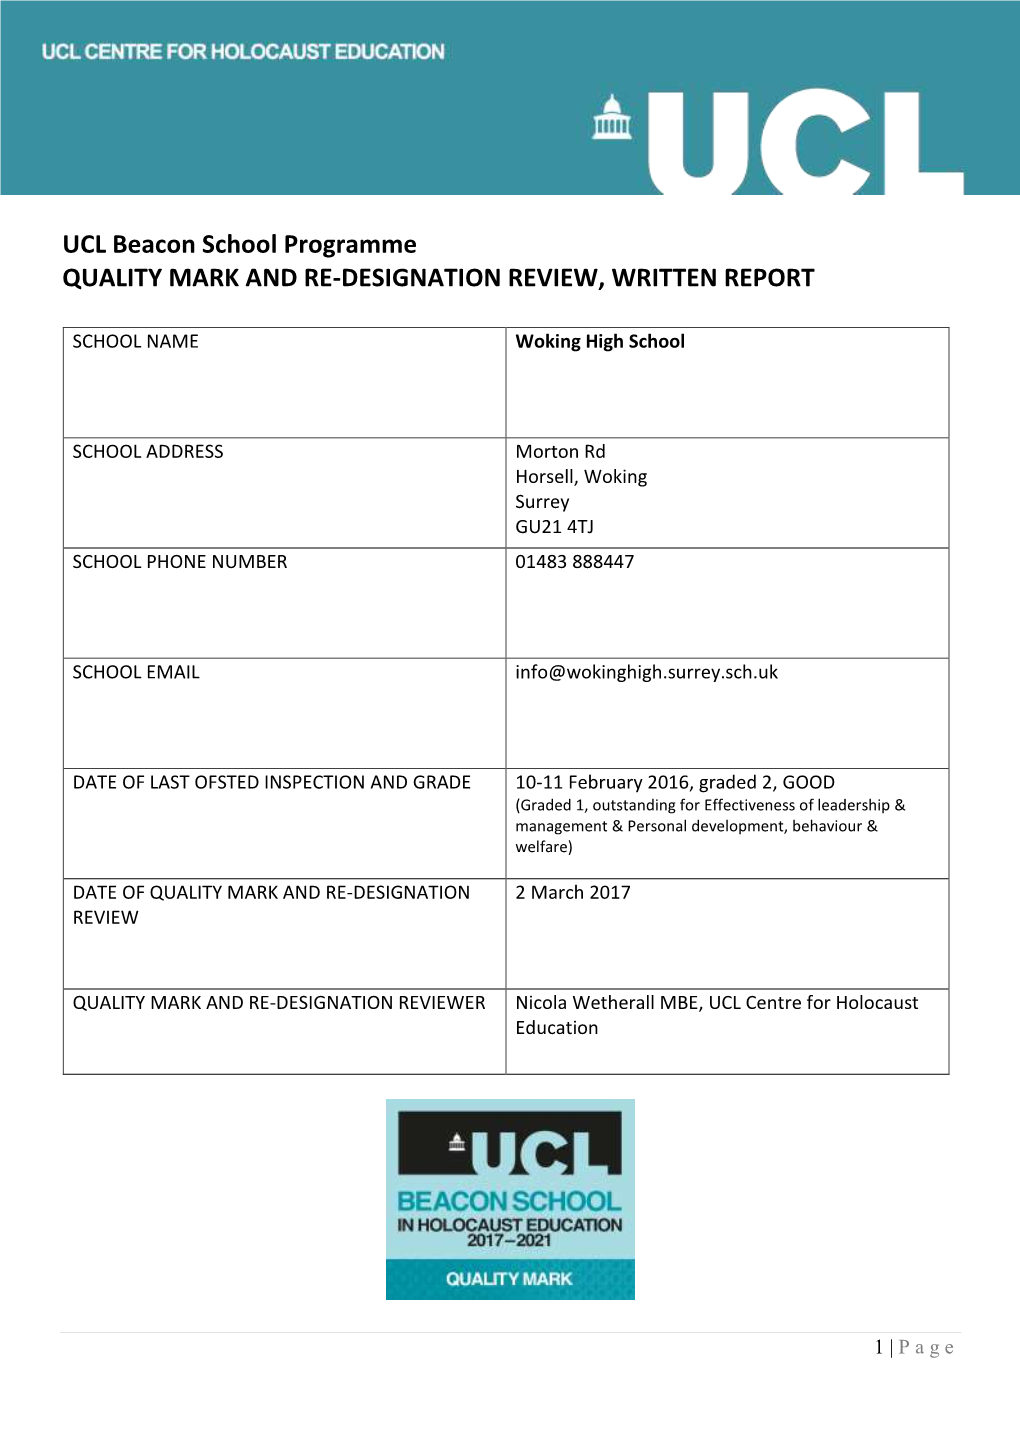 UCL Beacon School Programme QUALITY MARK and RE-DESIGNATION REVIEW, WRITTEN REPORT